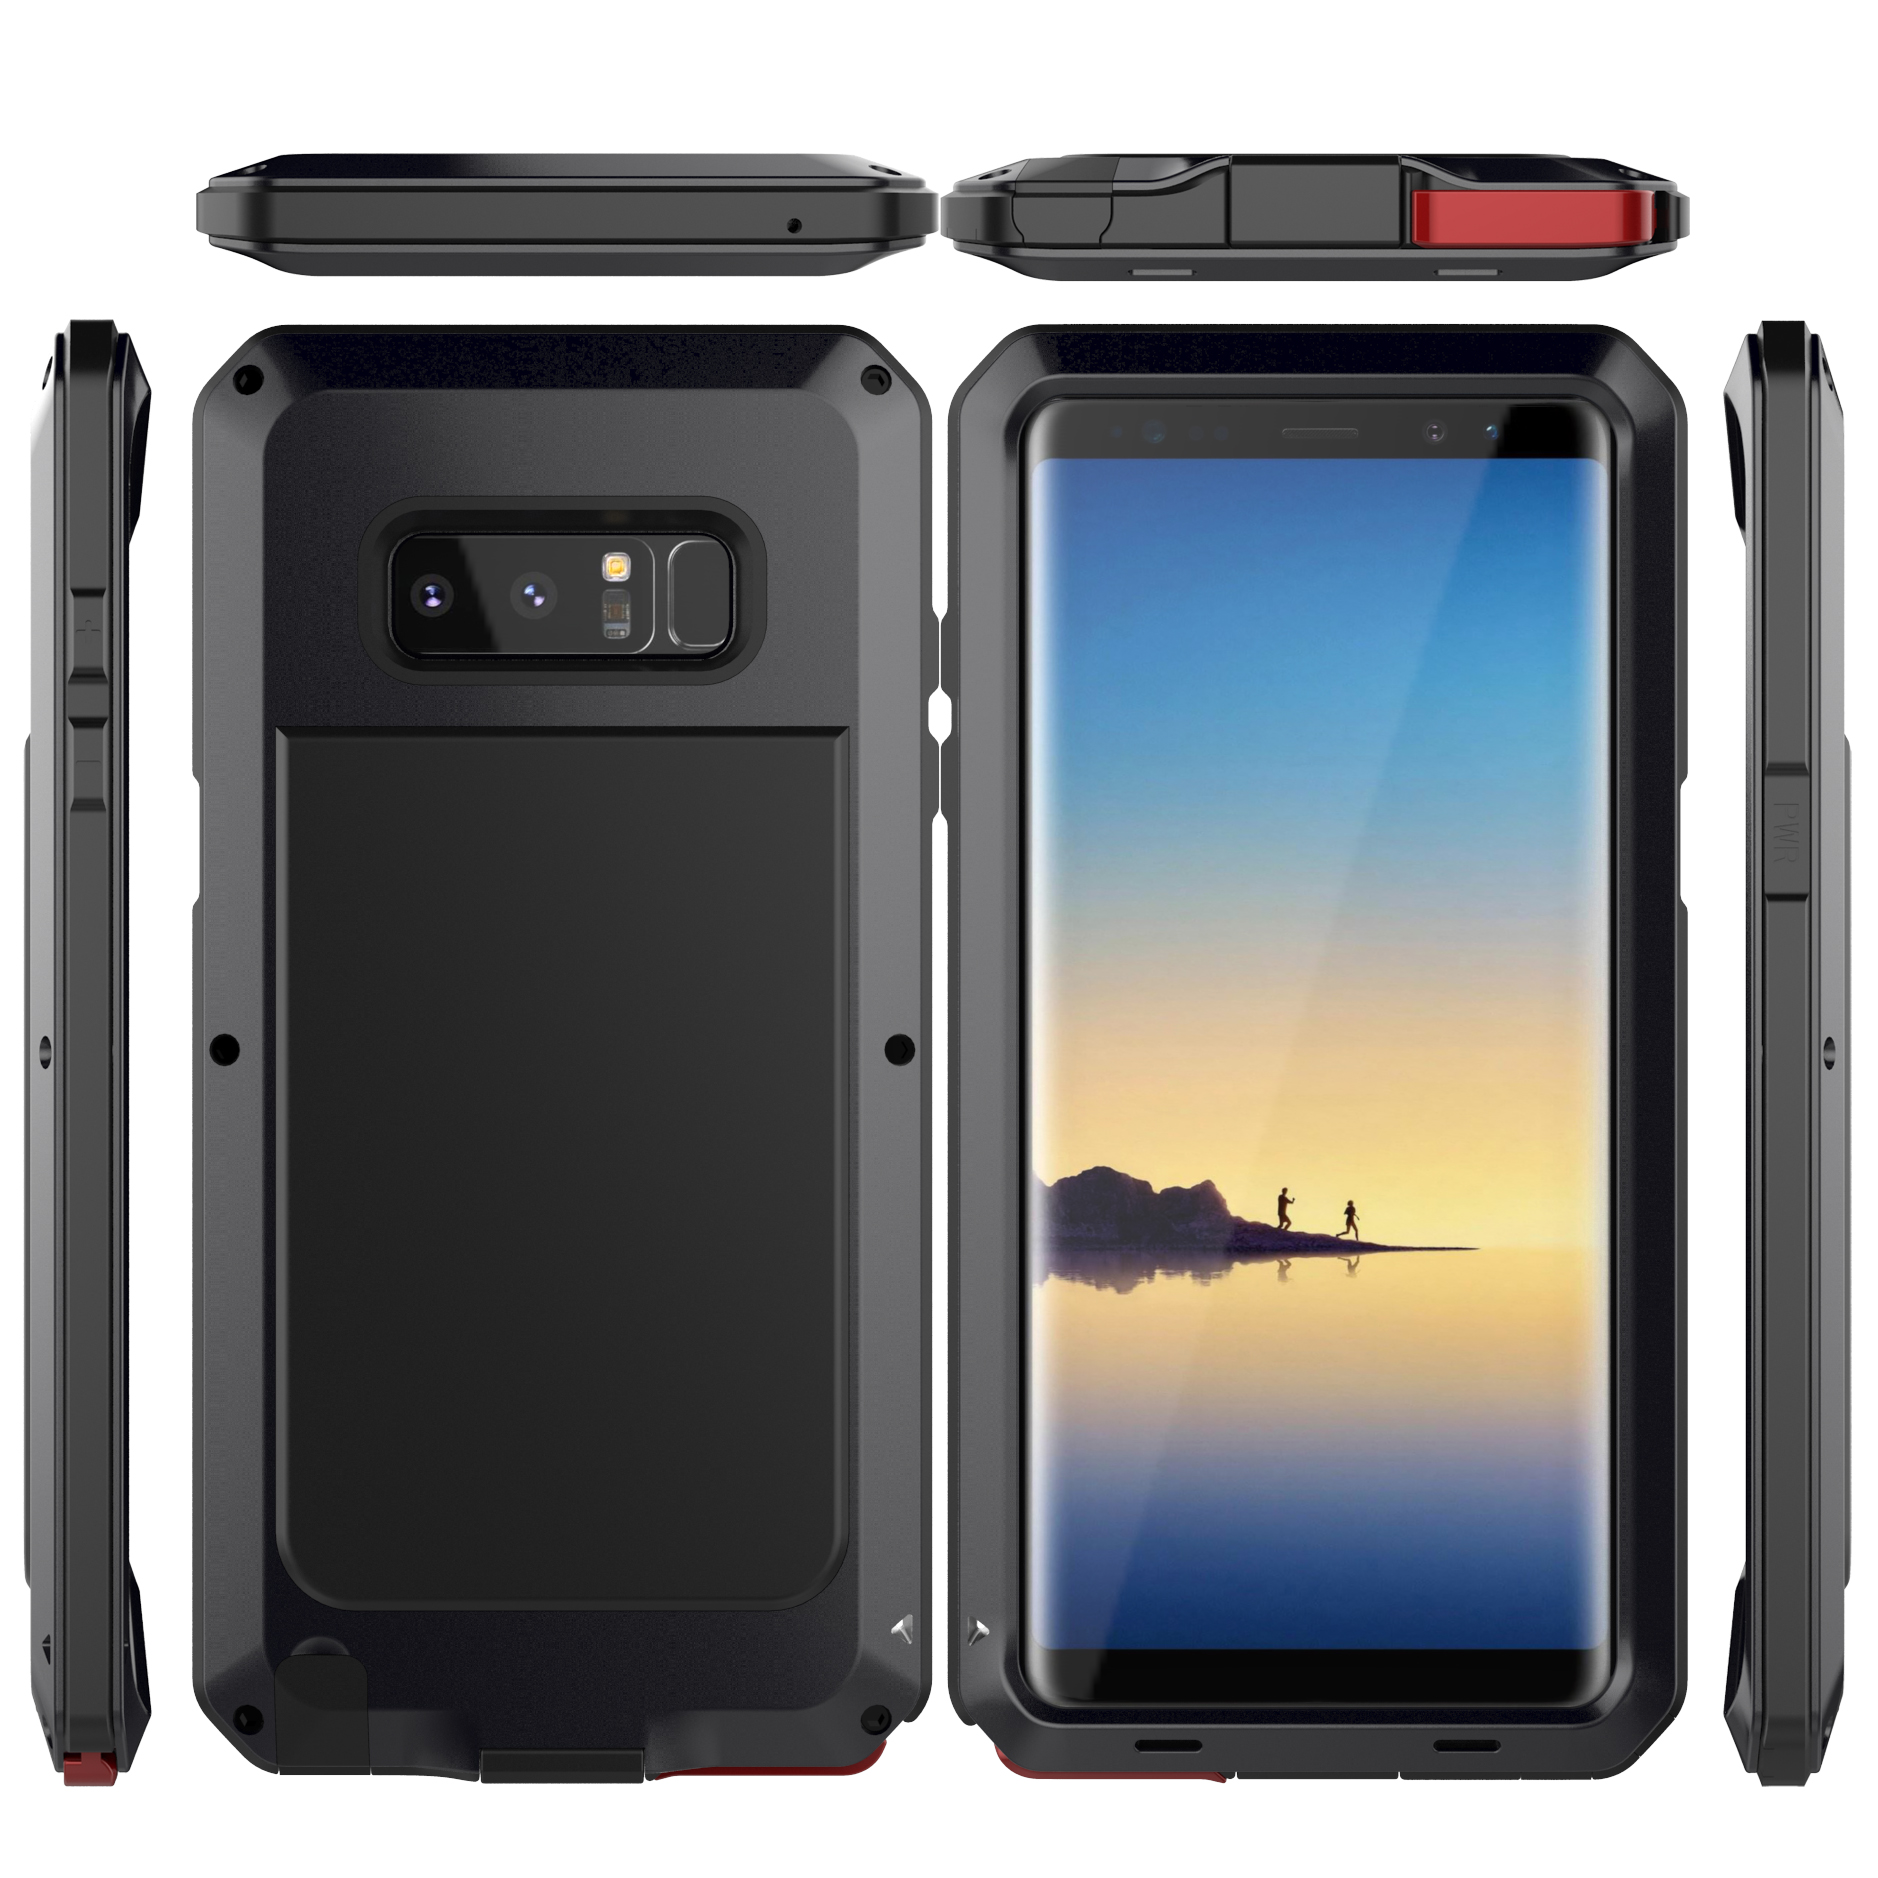 Aluminum-Shockproof-Dropproof-Protective-Case-For-Samsung-Galaxy-Note-8-1295529